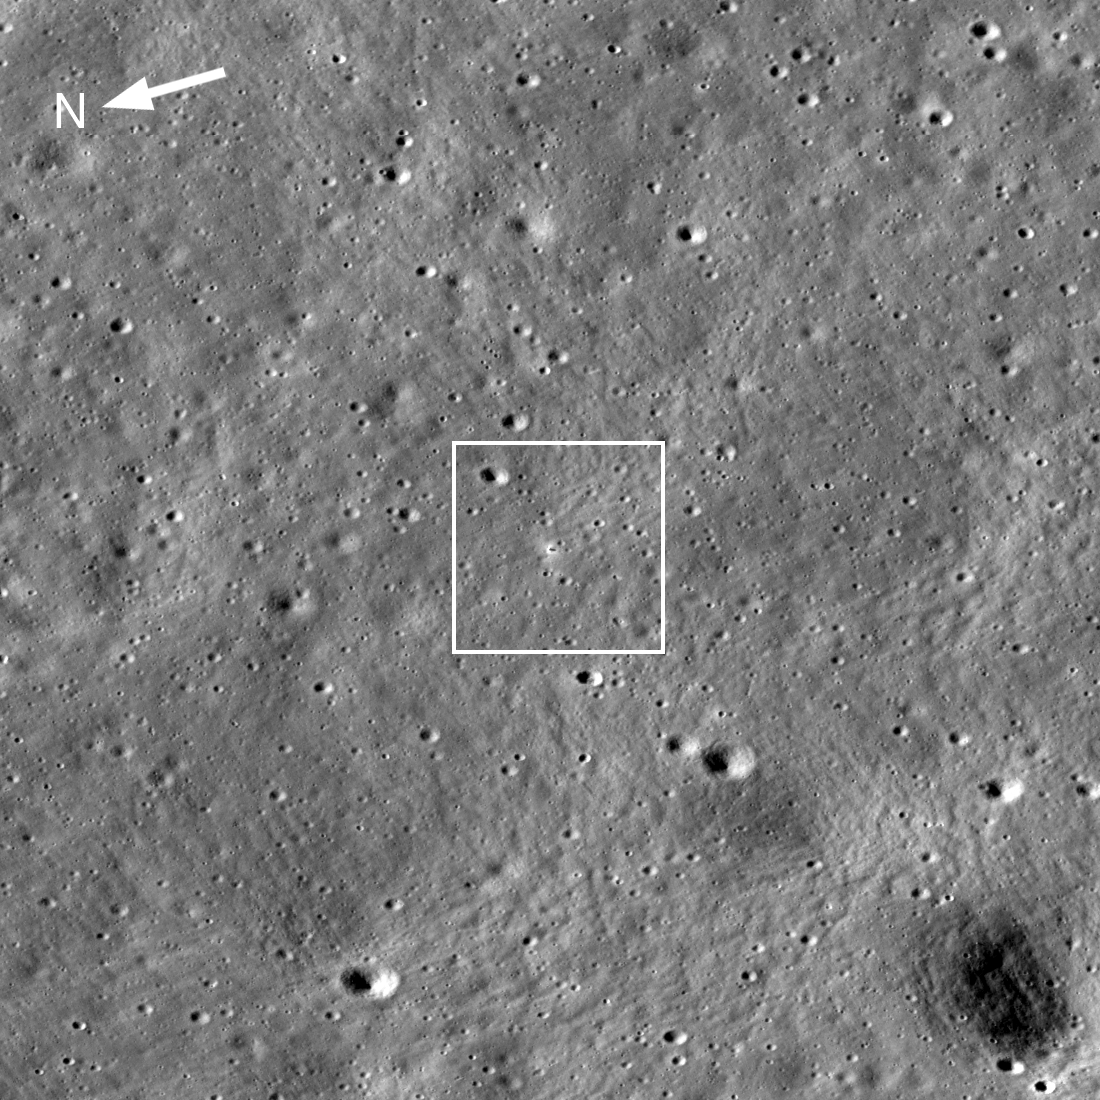 Annotated version of orbital view showing north arrow and box around lander